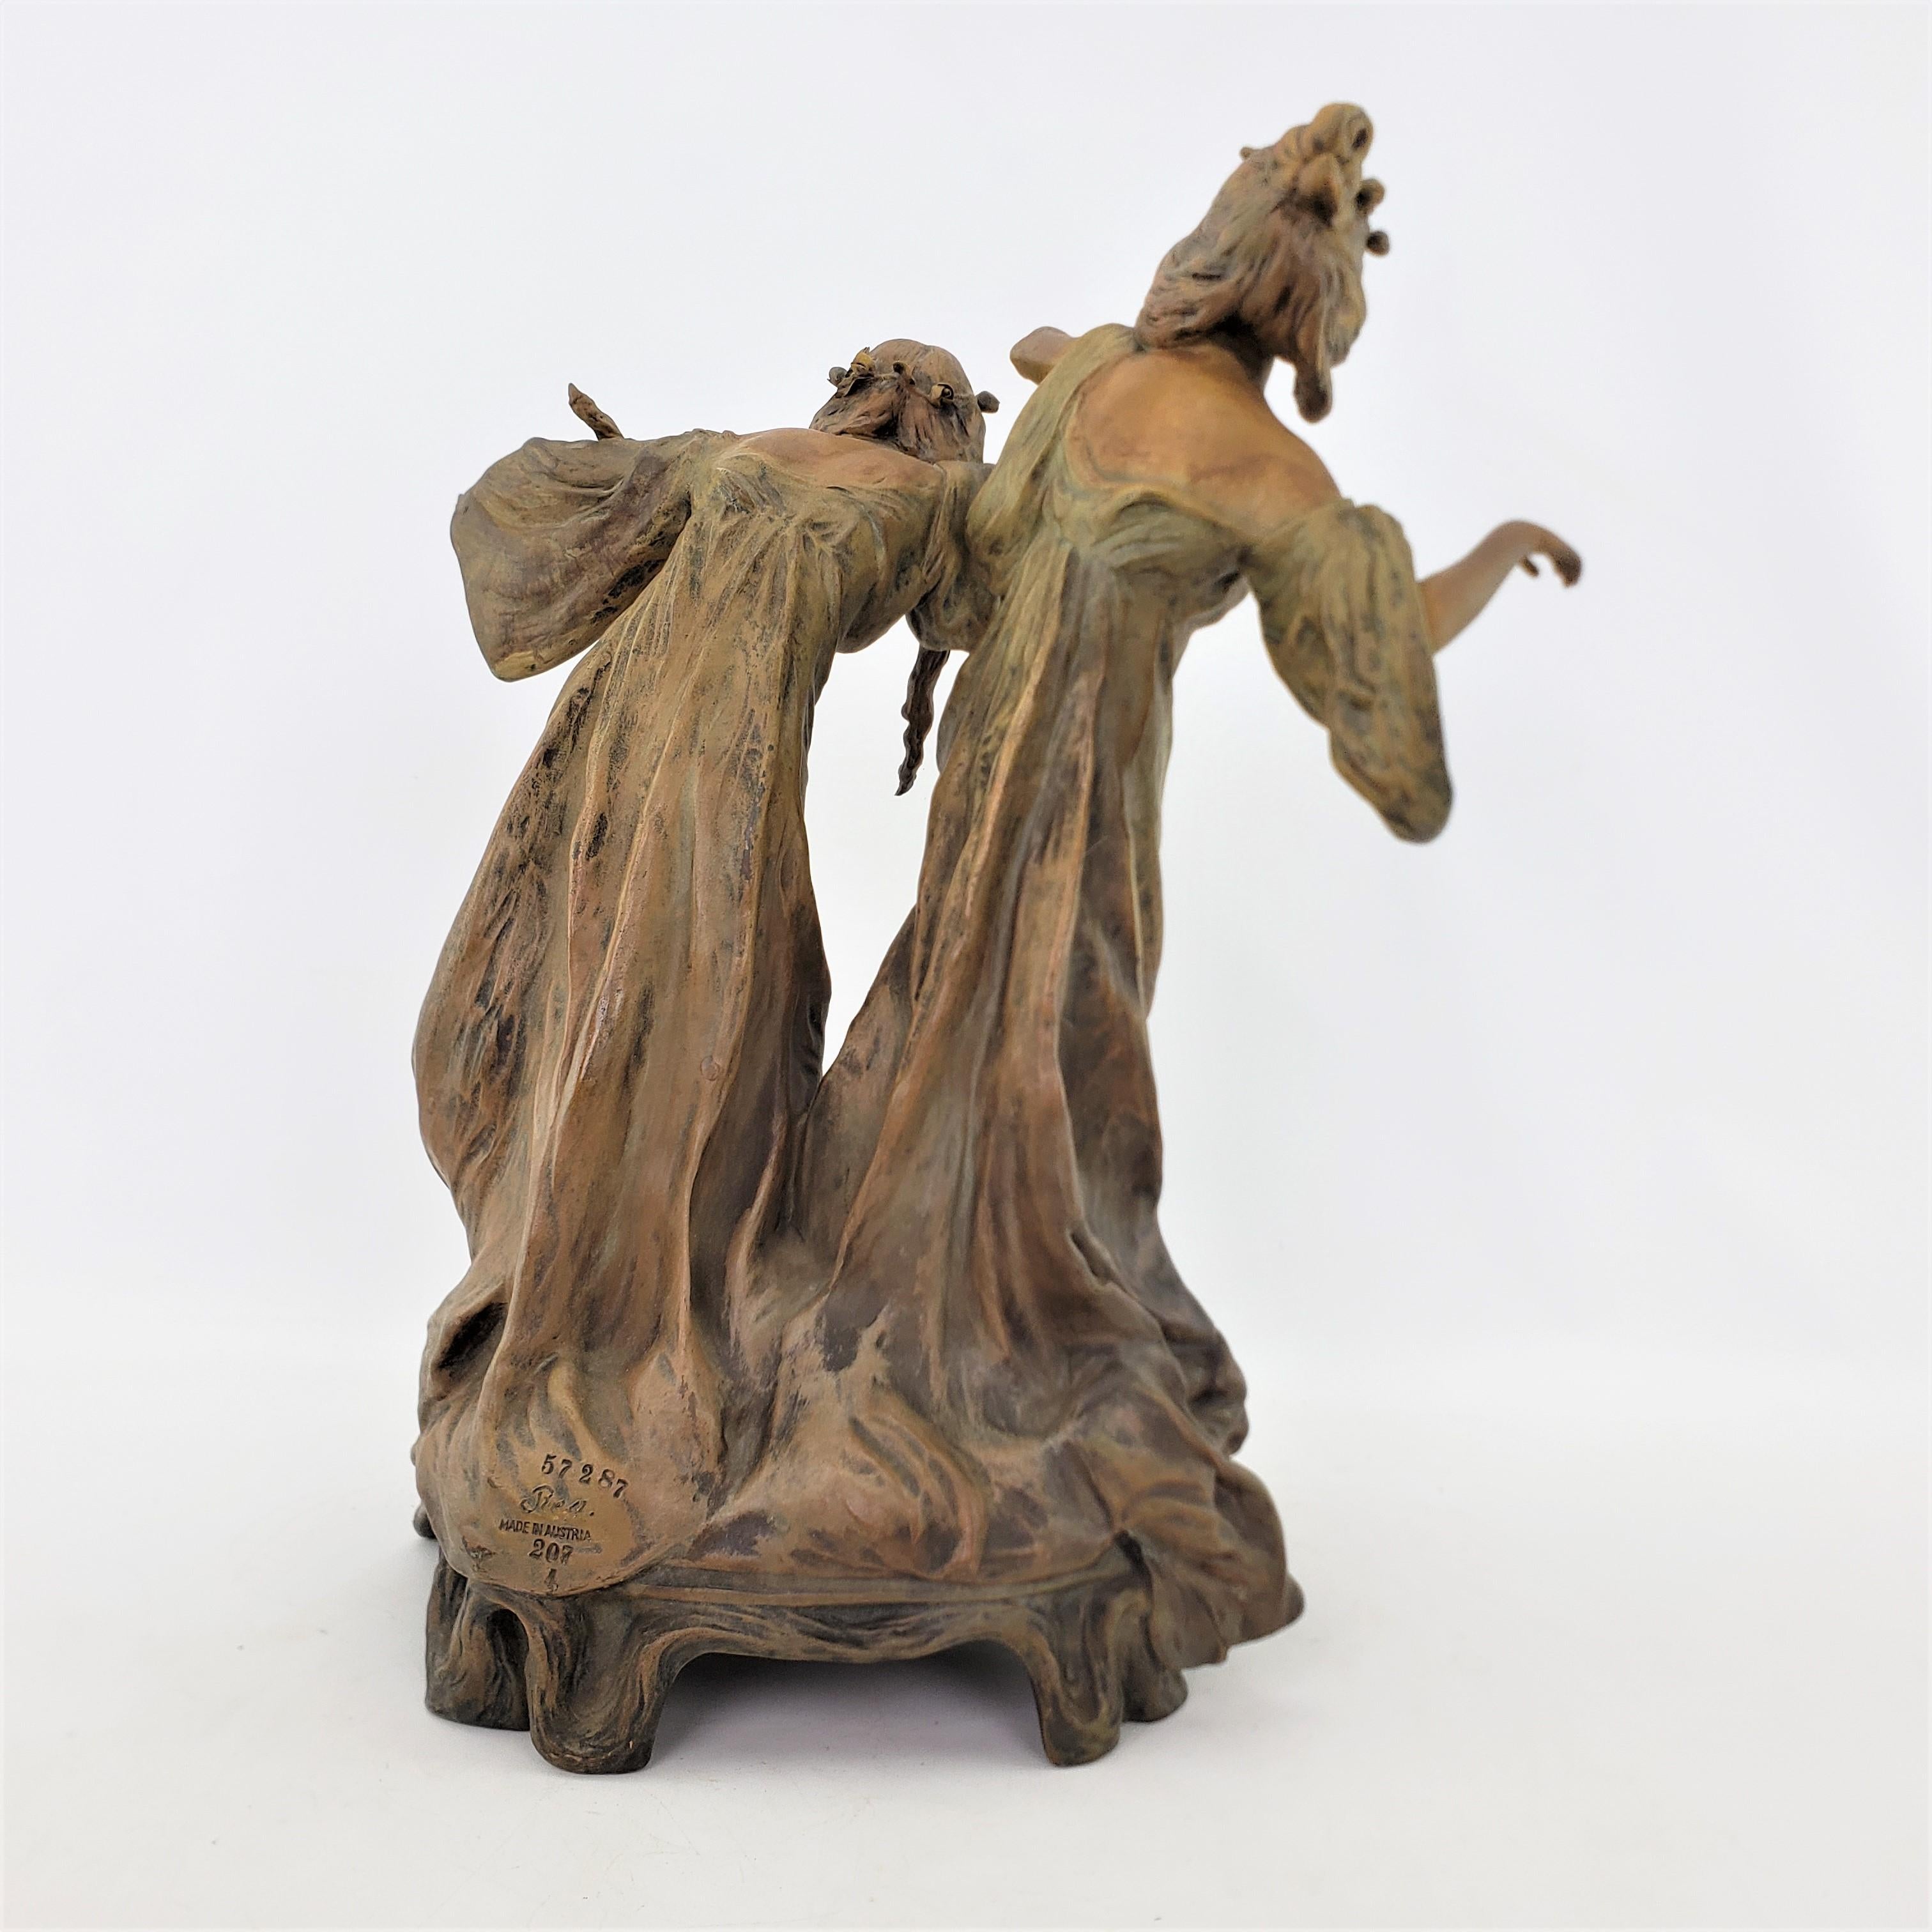 Antique Austrian Art Nouveau Patinated Terracotta Sculpture of Two Dancing Women In Good Condition For Sale In Hamilton, Ontario